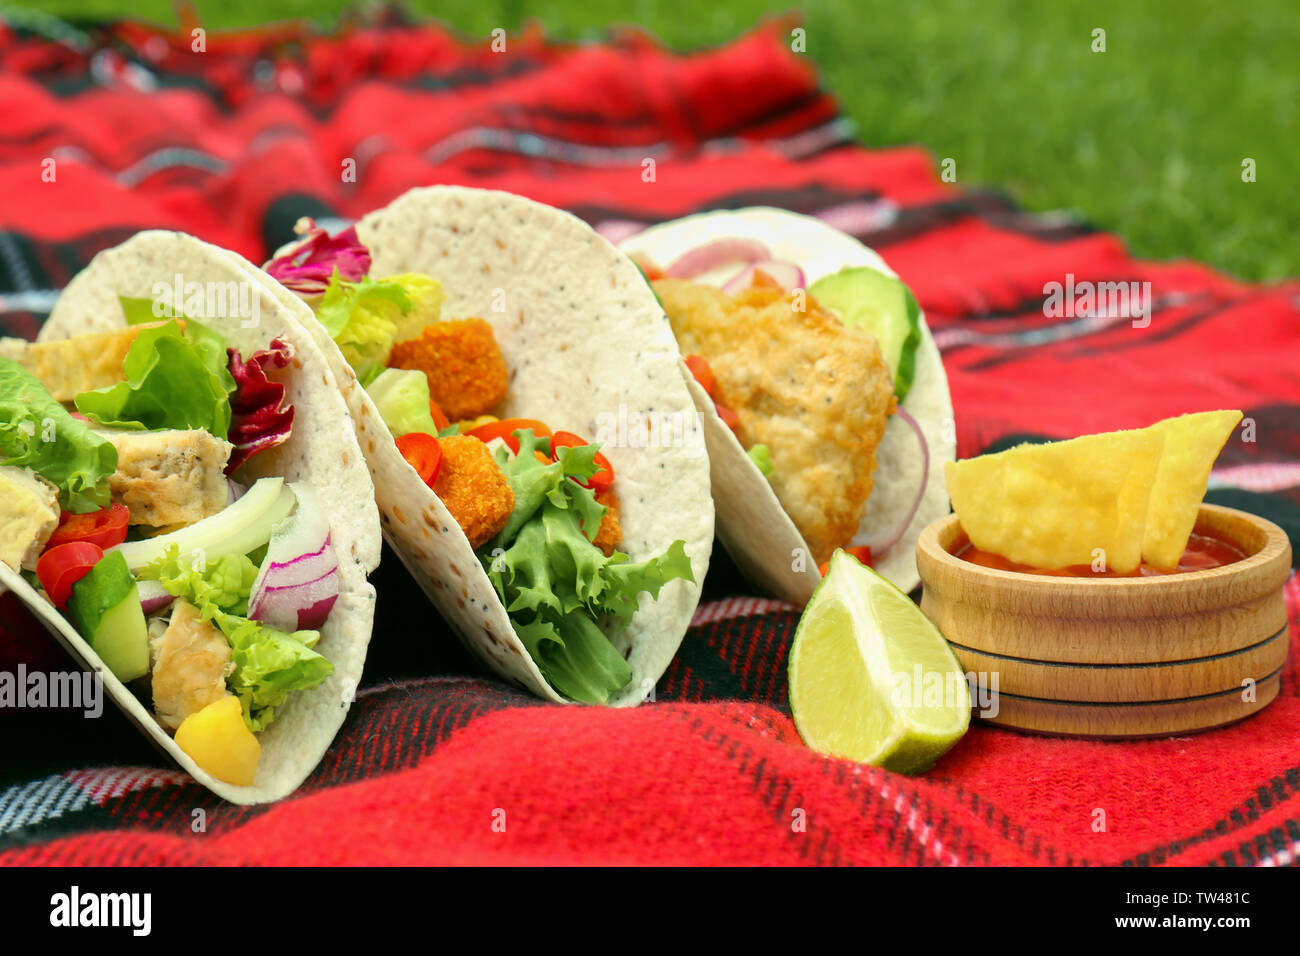 Delicious fish tacos on picnic blanket Stock Photo - Alamy